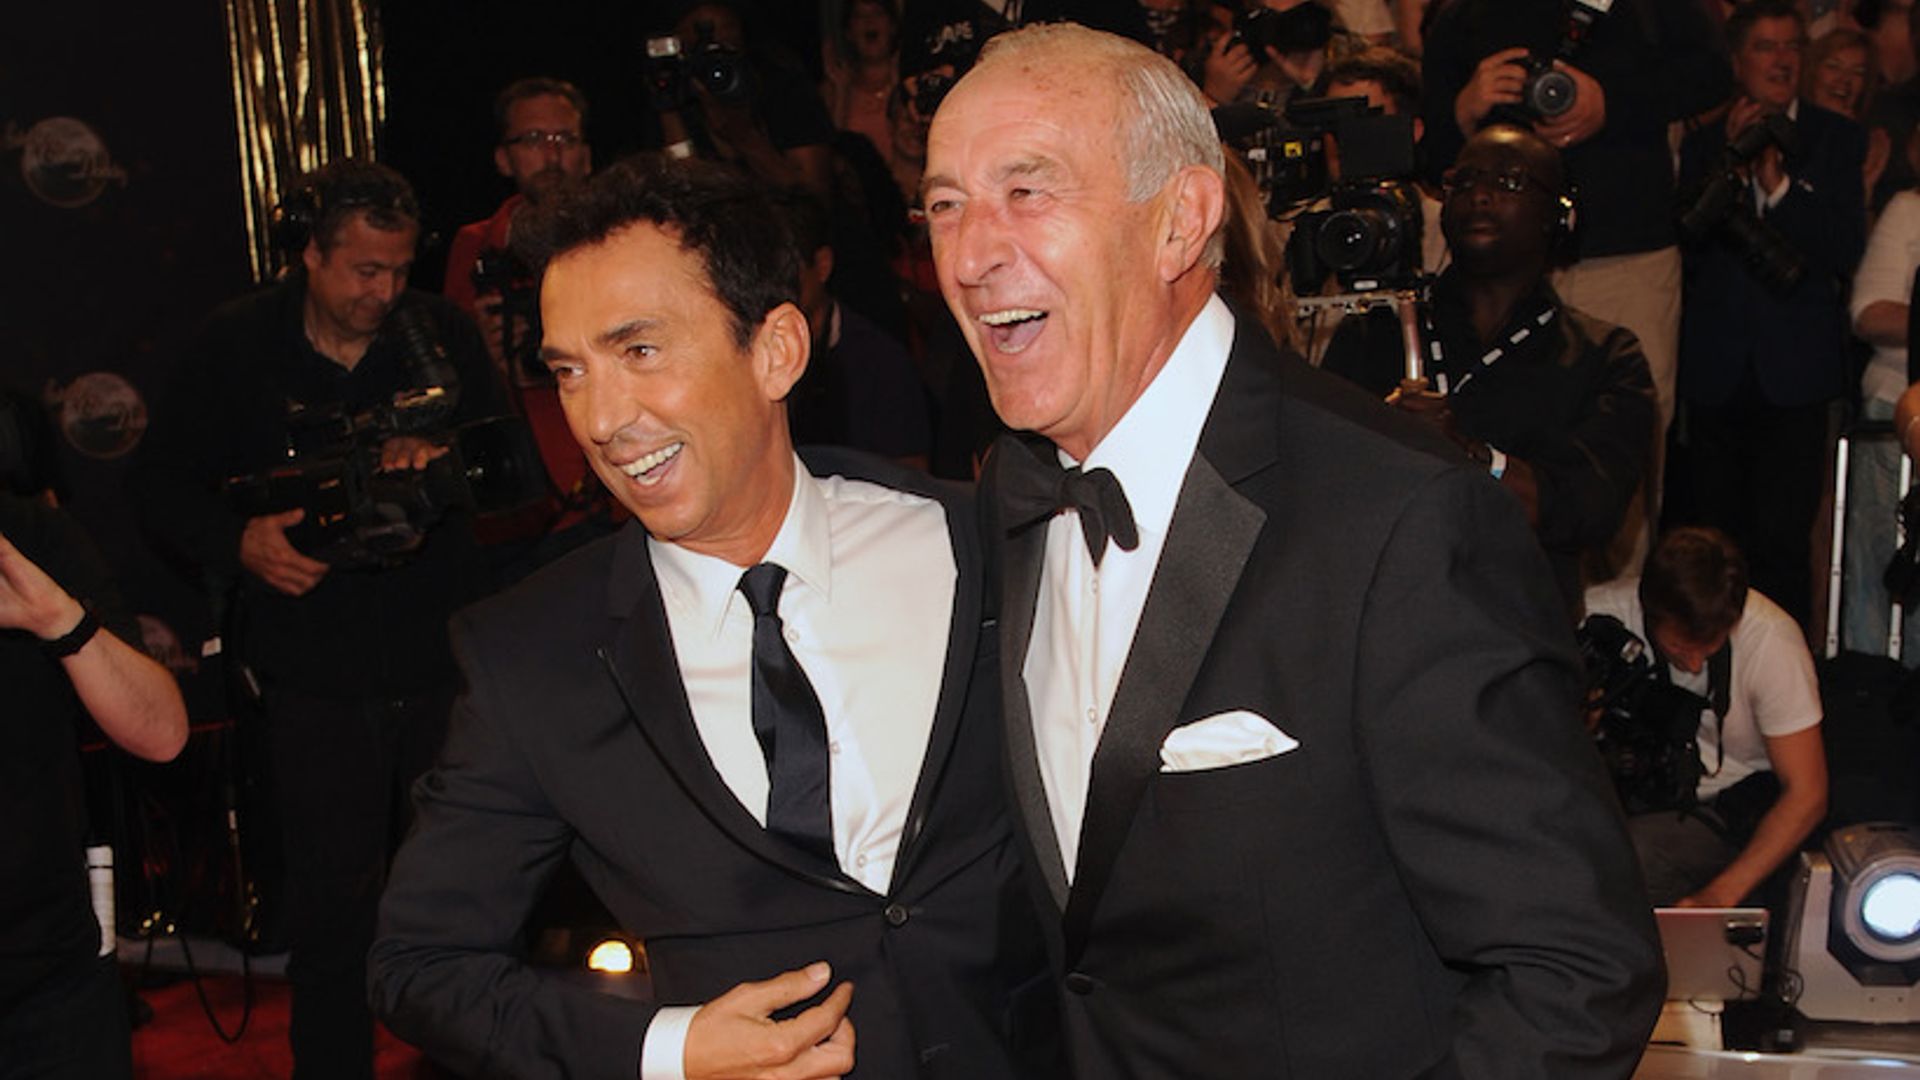 Bruno Tonioli delights with rare photograph with Len Goodman - but fans can't believe one Strictly detail